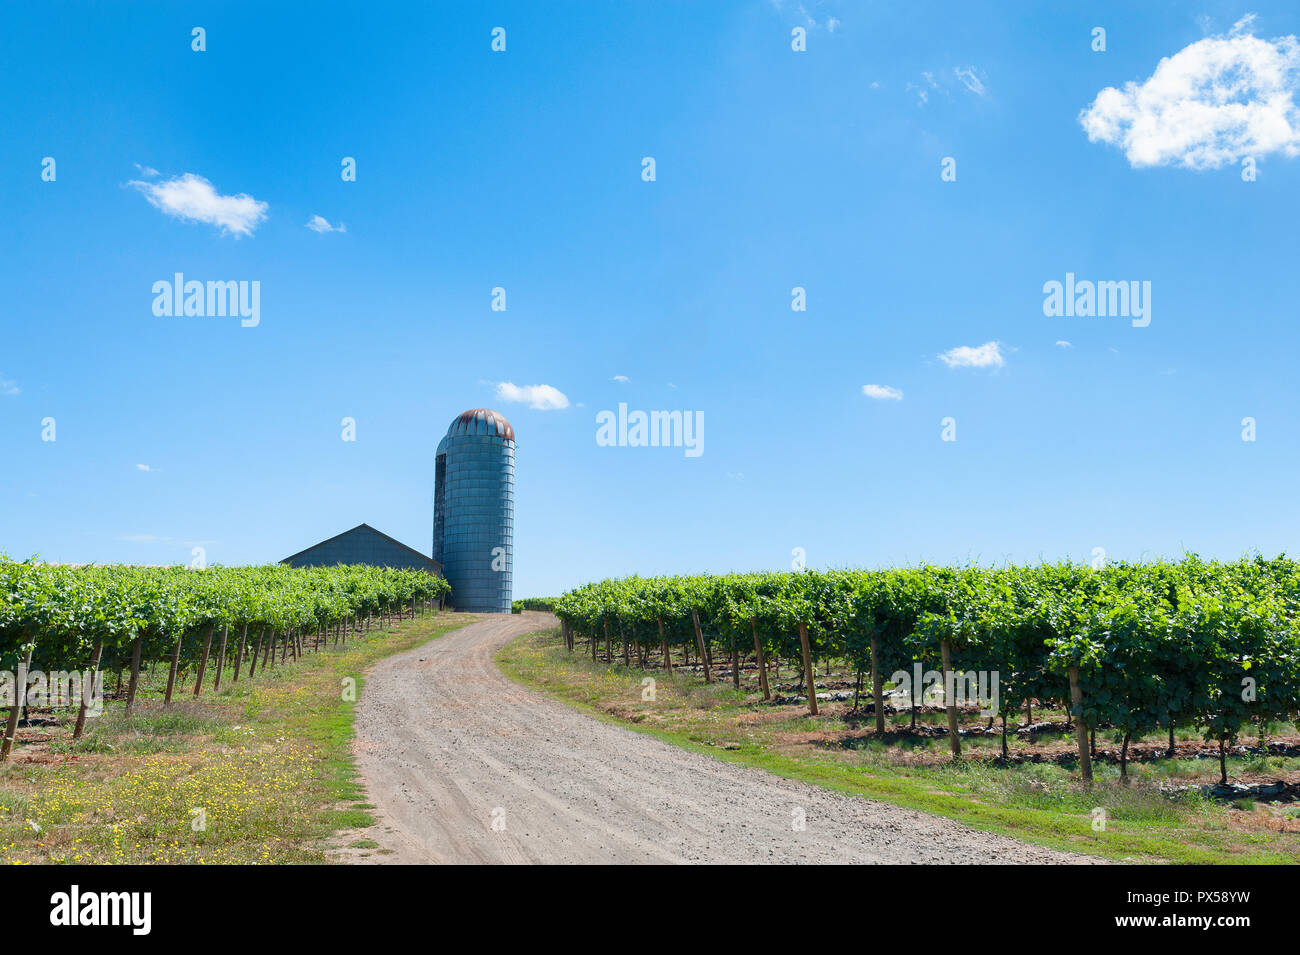 A dirt road with grape vines on either side leads to a silo under nearly cloudless sky. Stock Photo